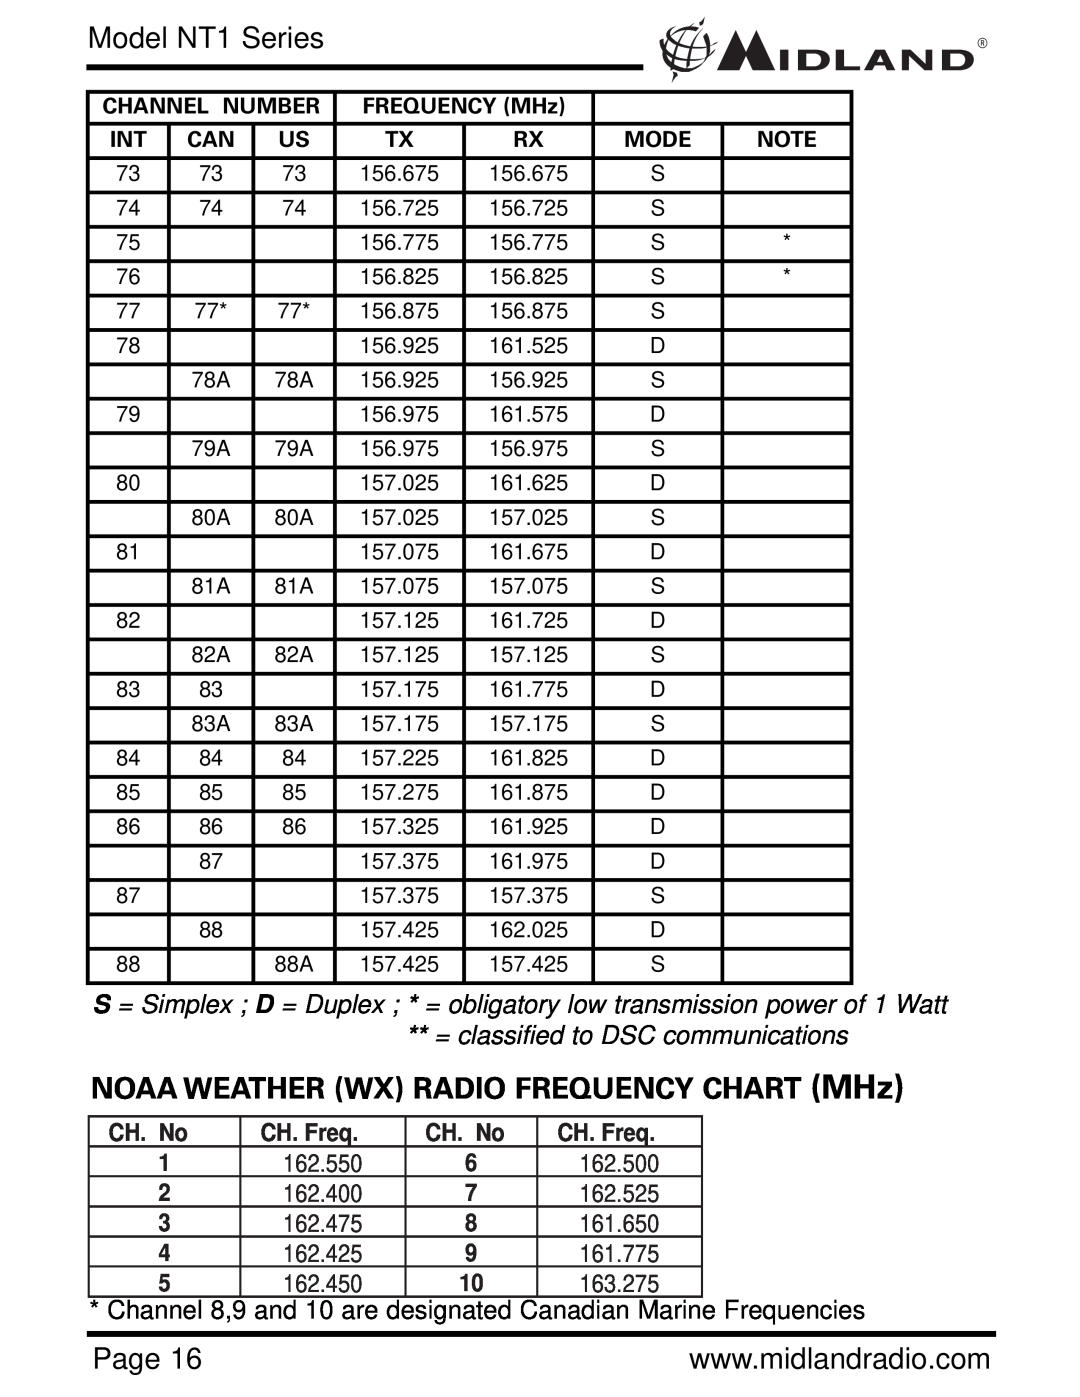 Midland Radio NT1VP NOAA WEATHER WX RADIO FREQUENCY CHART MHz, = classified to DSC communications, CH. No, CH. Freq 